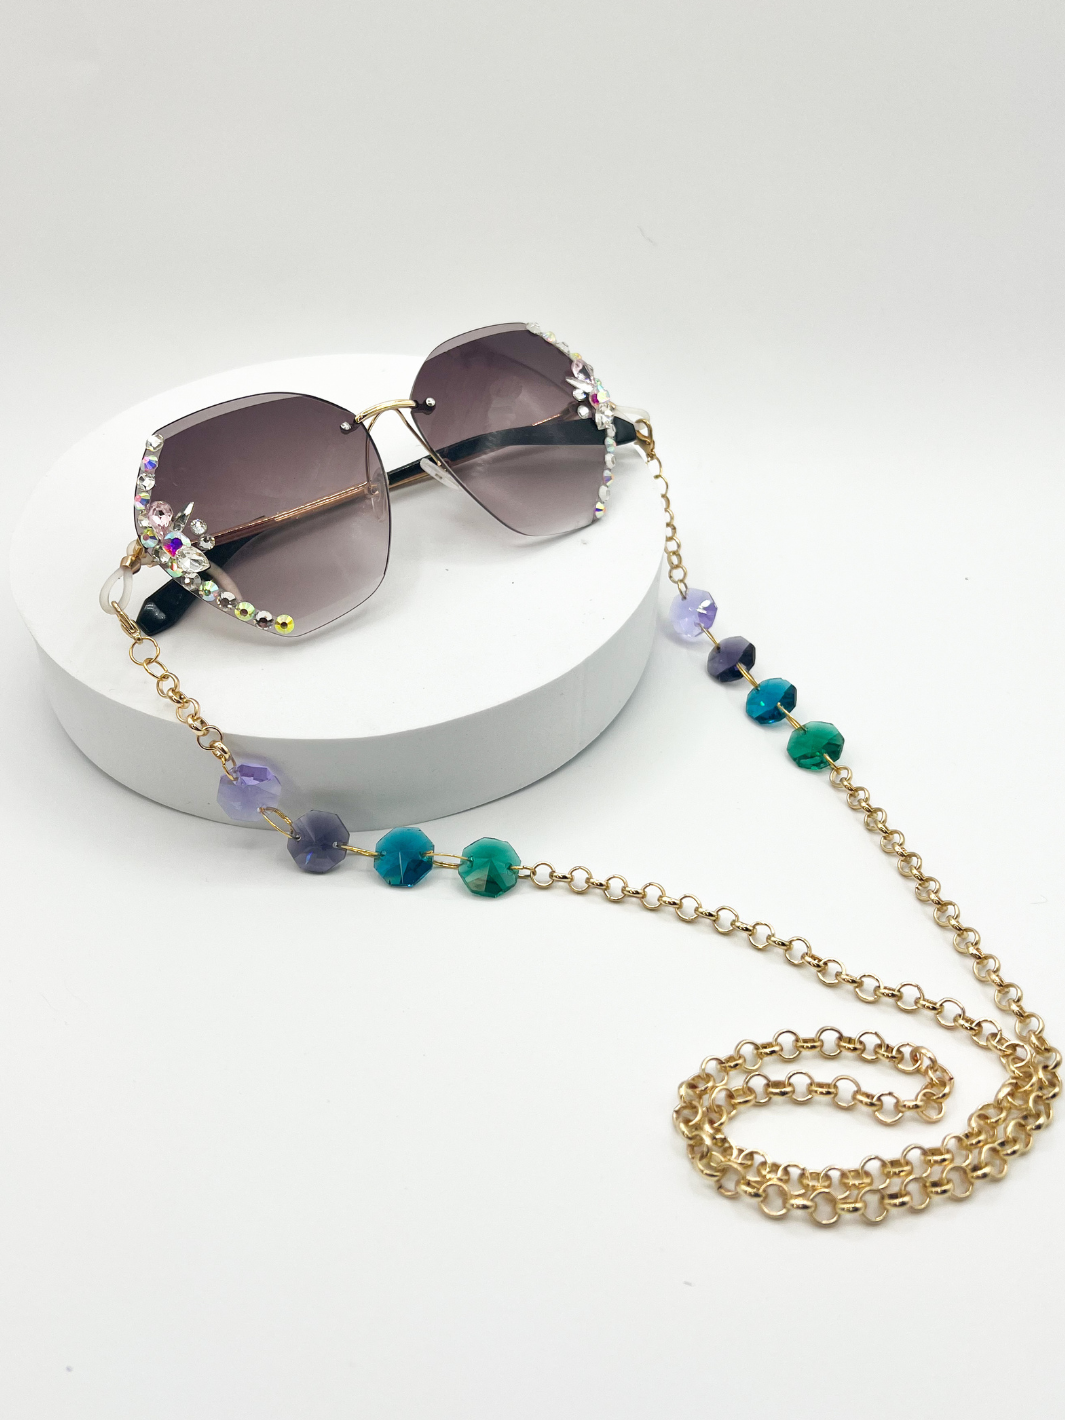 Product shot of Gold rolo chain Sauce Strap Glasses chains, with four beads. light purple, dark purple, blue teal, and green. being worn on large framelesssunglasses that have rhinestones on the sides. a white background.